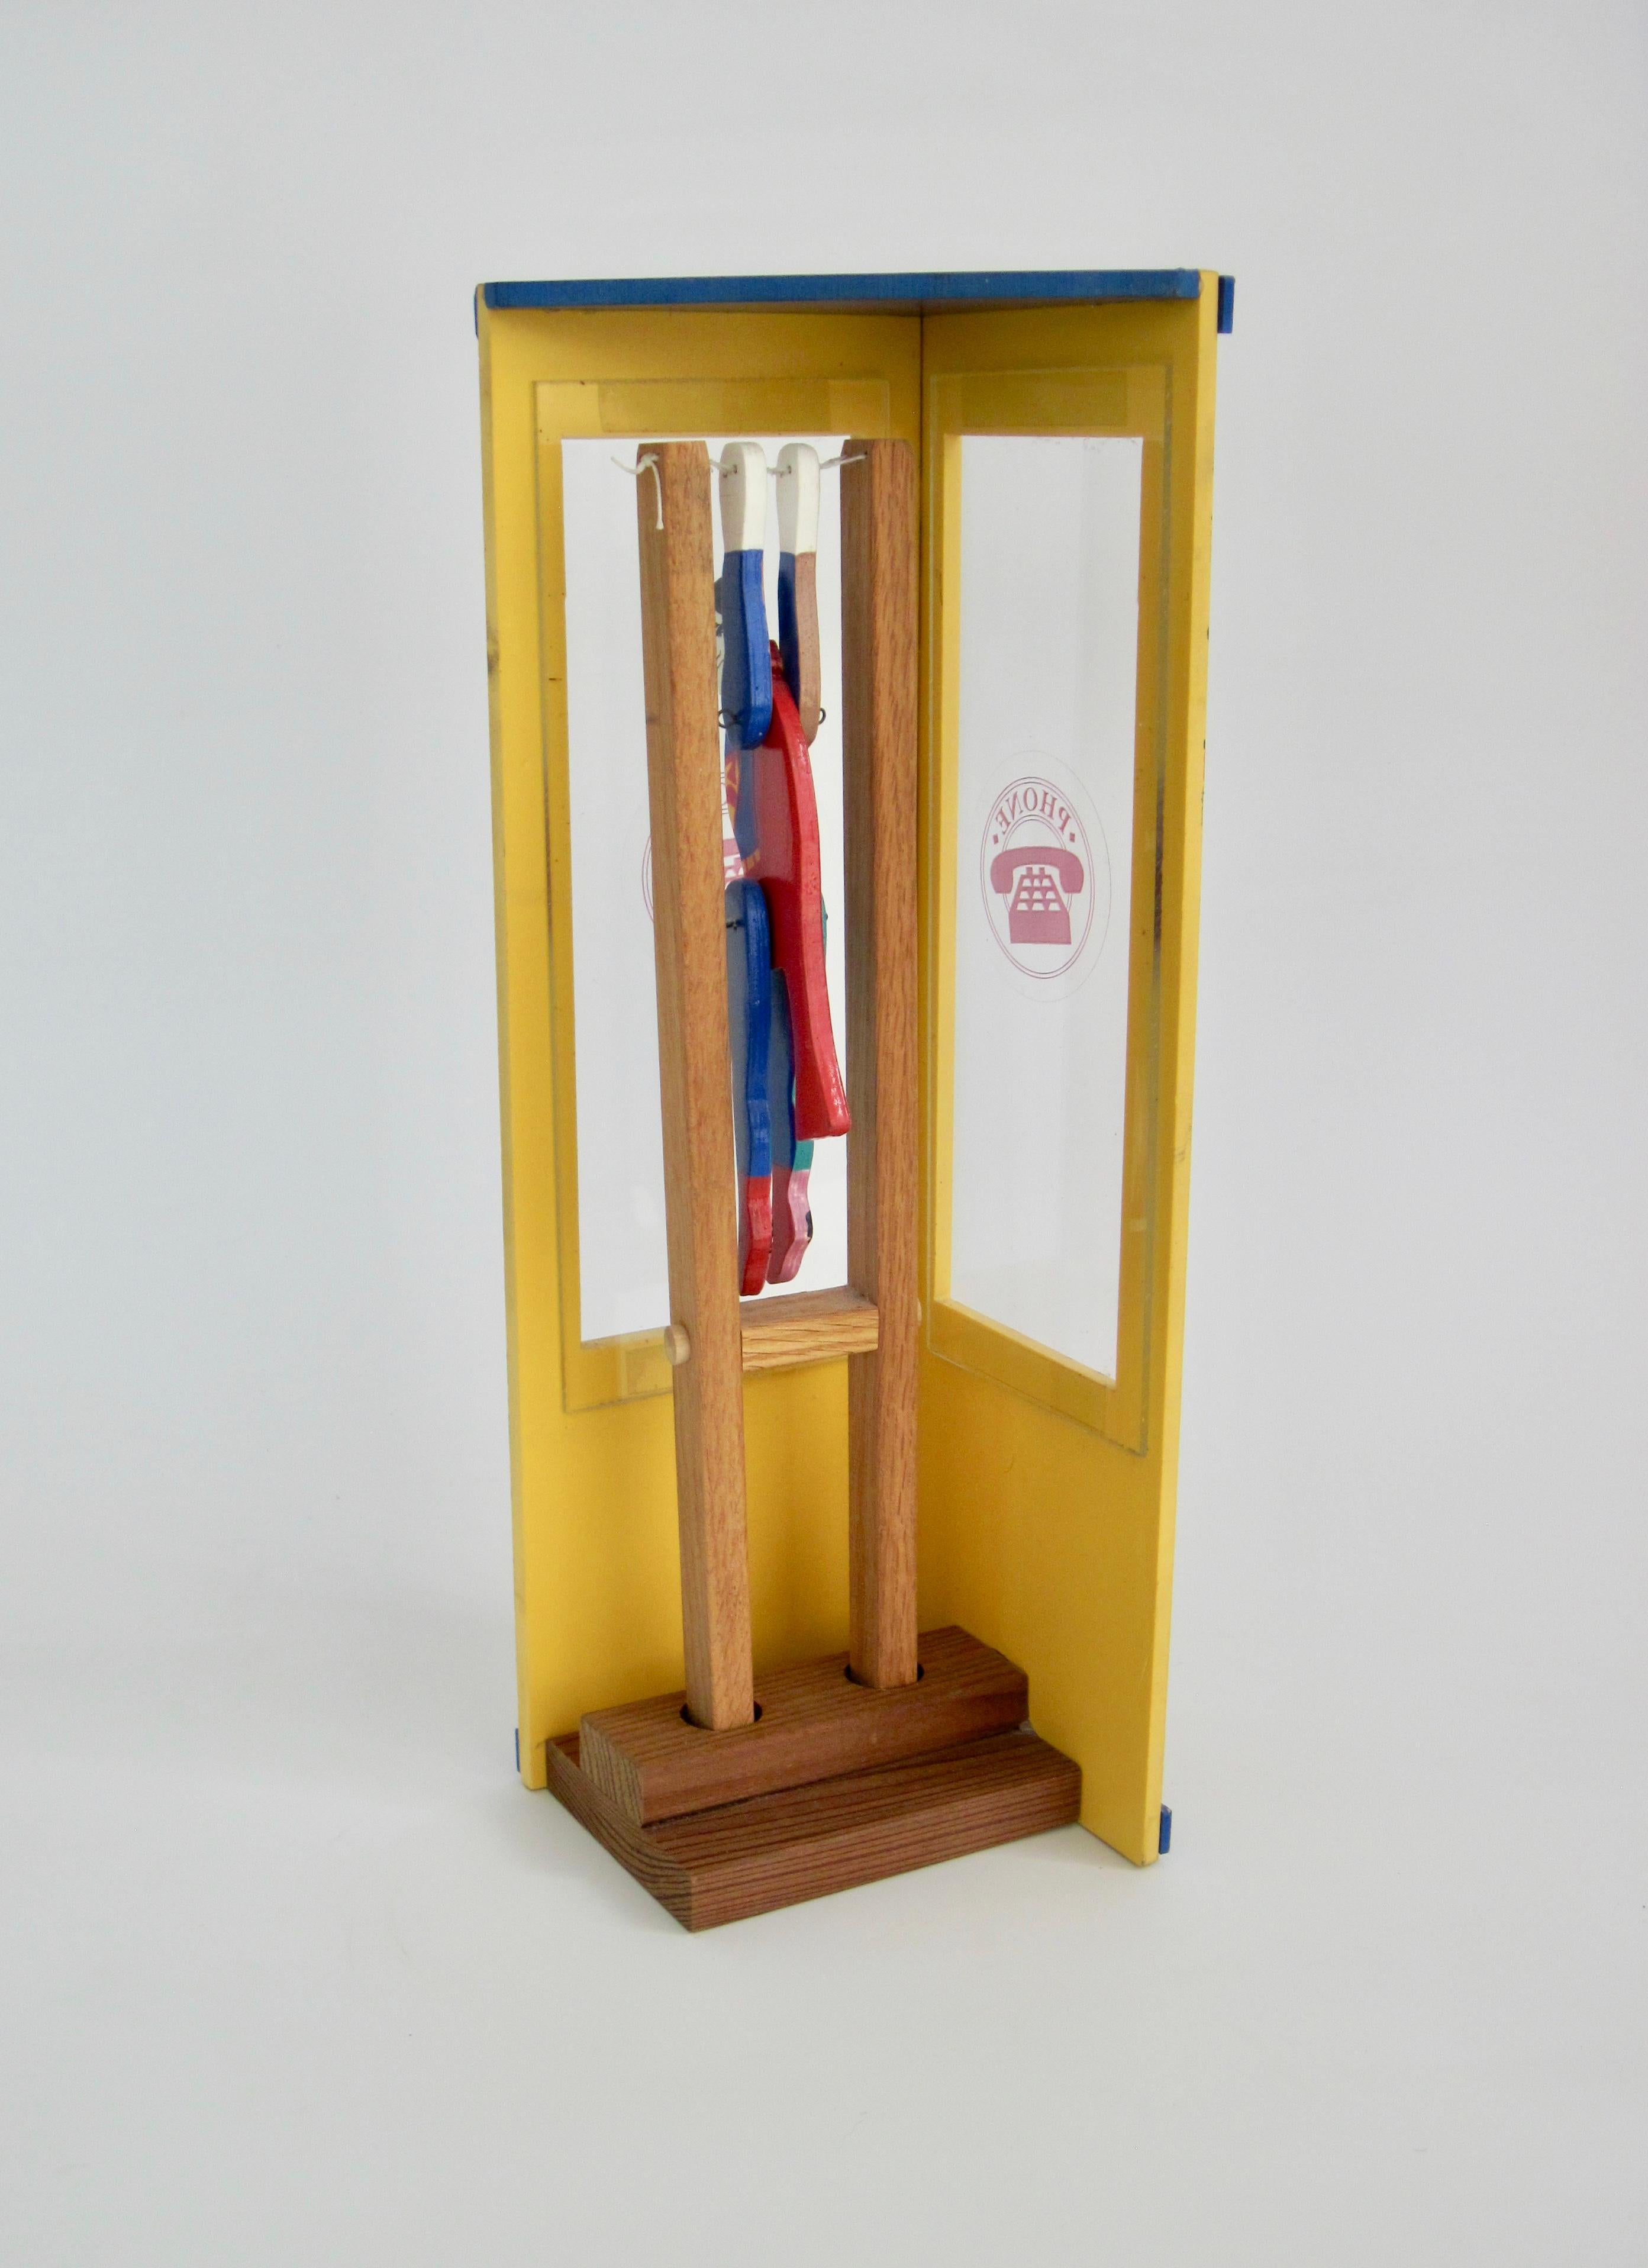 Superman/Clark Kent Wooden Trapeze Artist Toy with Graffiti Phone Booth For Sale 1